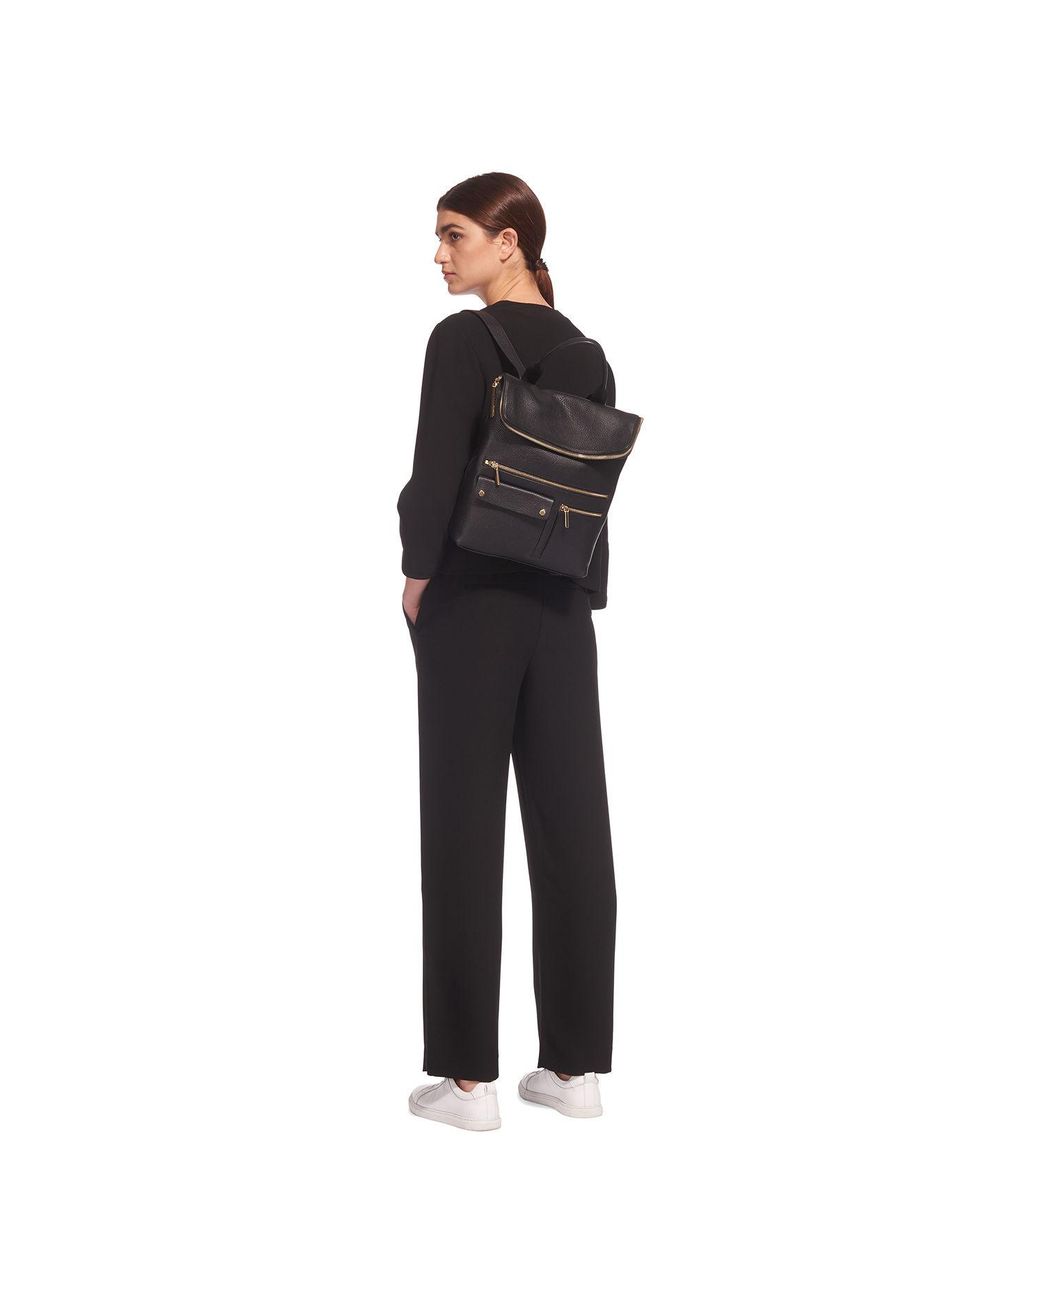 Whistles Farrow Pocket Detail Backpack in Black | Lyst Canada